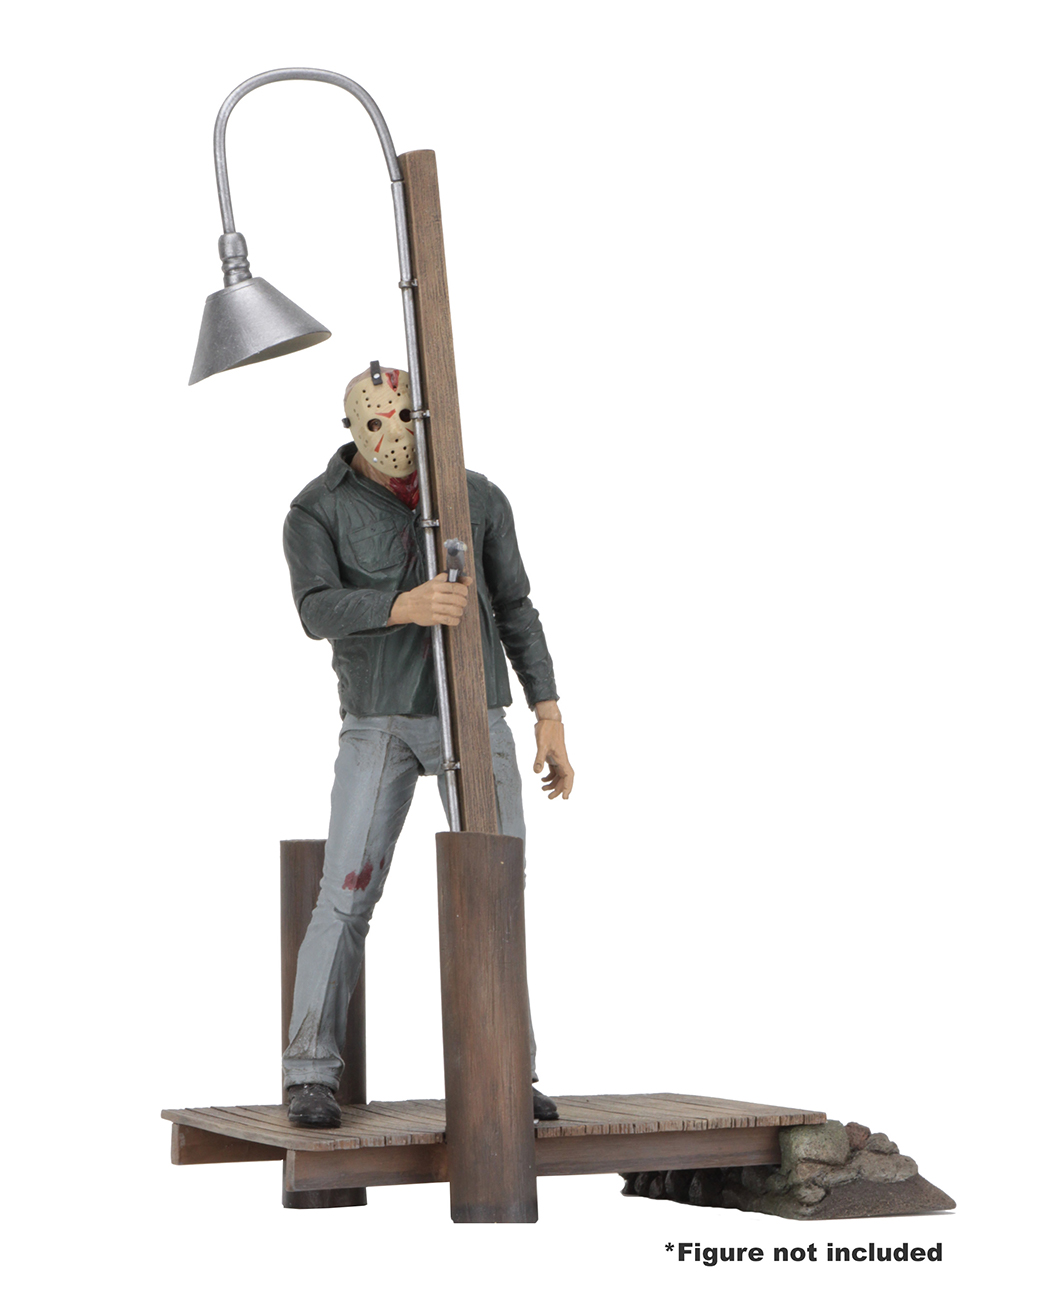 Friday the 13th – Accessory Pack – Camp 